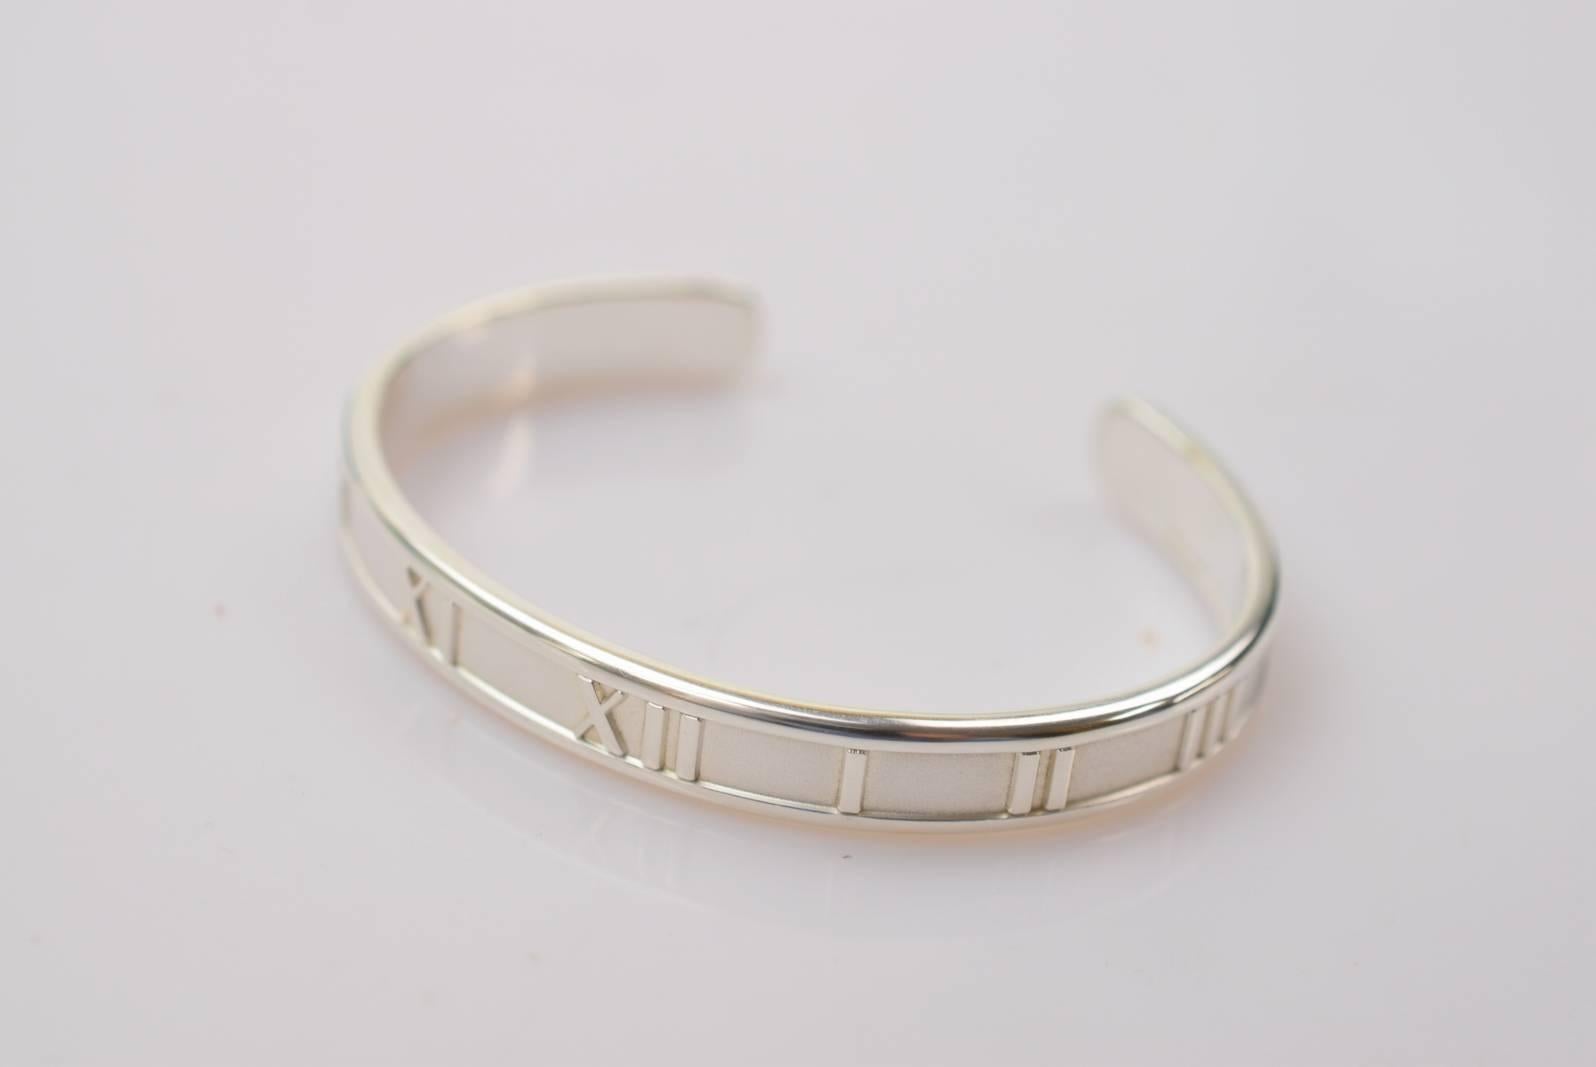 Tiffany & Co. Sterling Silver Roman Numerals Atlas Cuff Bangle Bracelet in Box

Sterling silver - 925
Slip on
Made in Italy
Inner circumference ~6